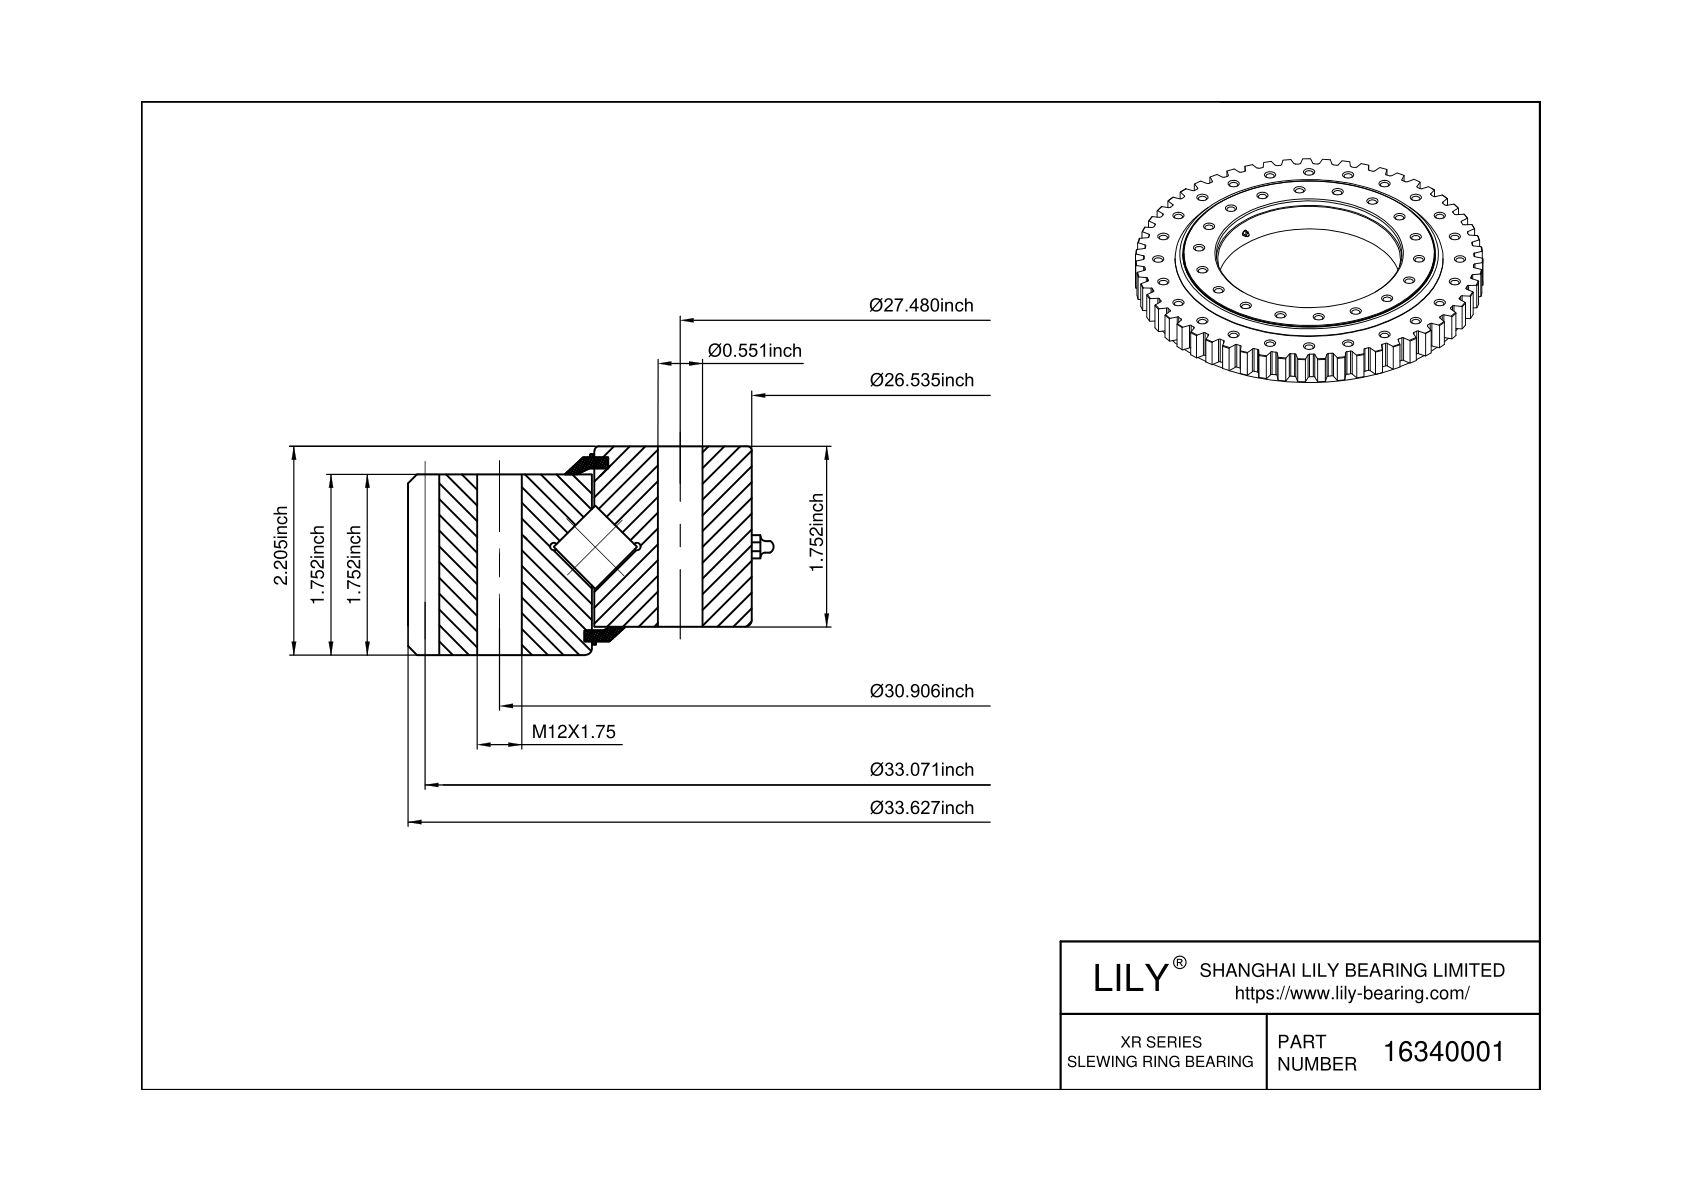 16340001 Cross Roller Slewing Ring Bearing cad drawing